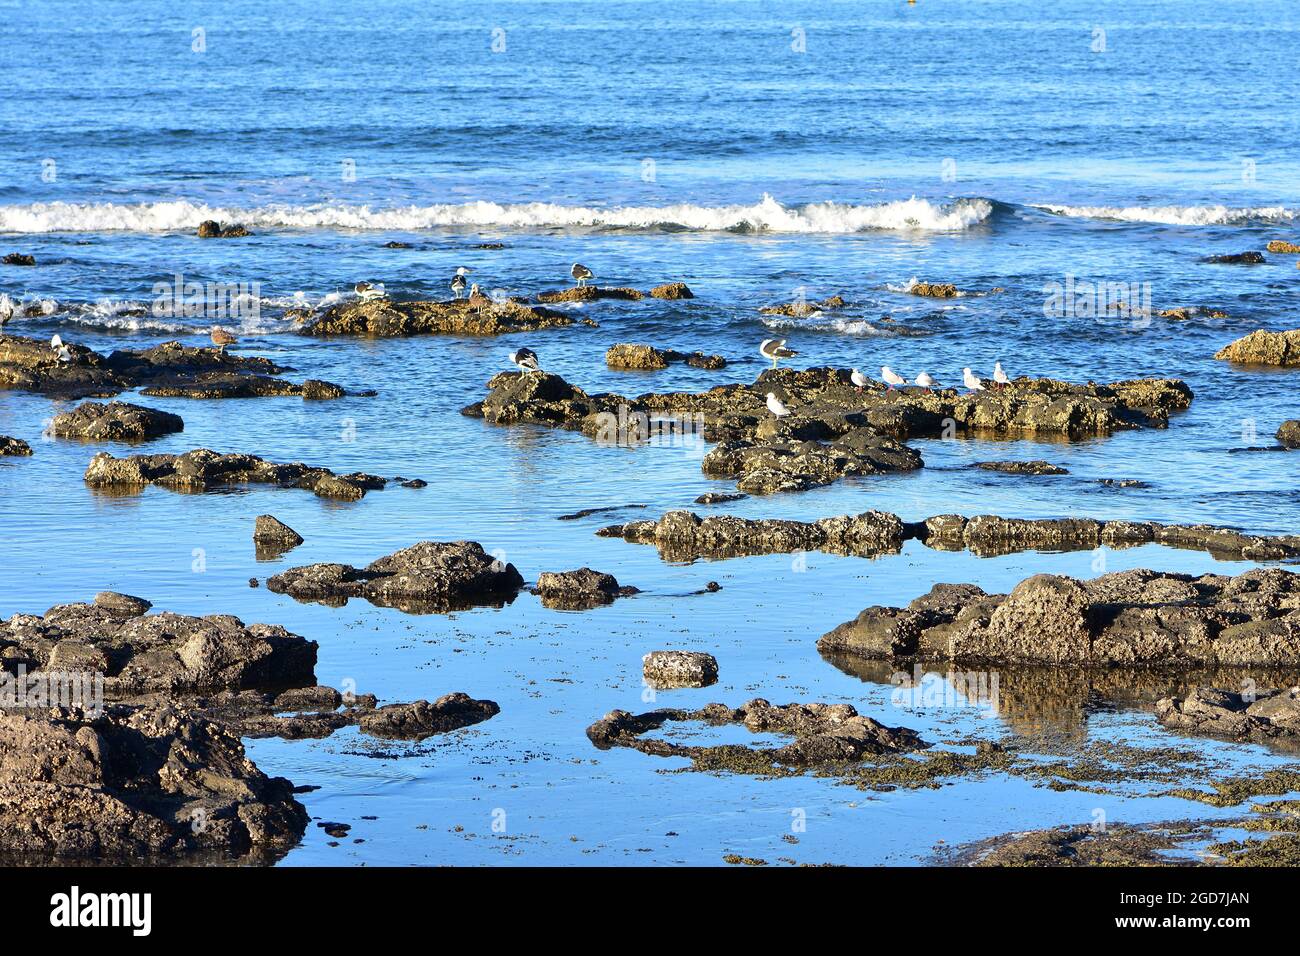 Rocks of flat coastal reef covered with encrusting organisms protruding from water during low tide period. Stock Photo